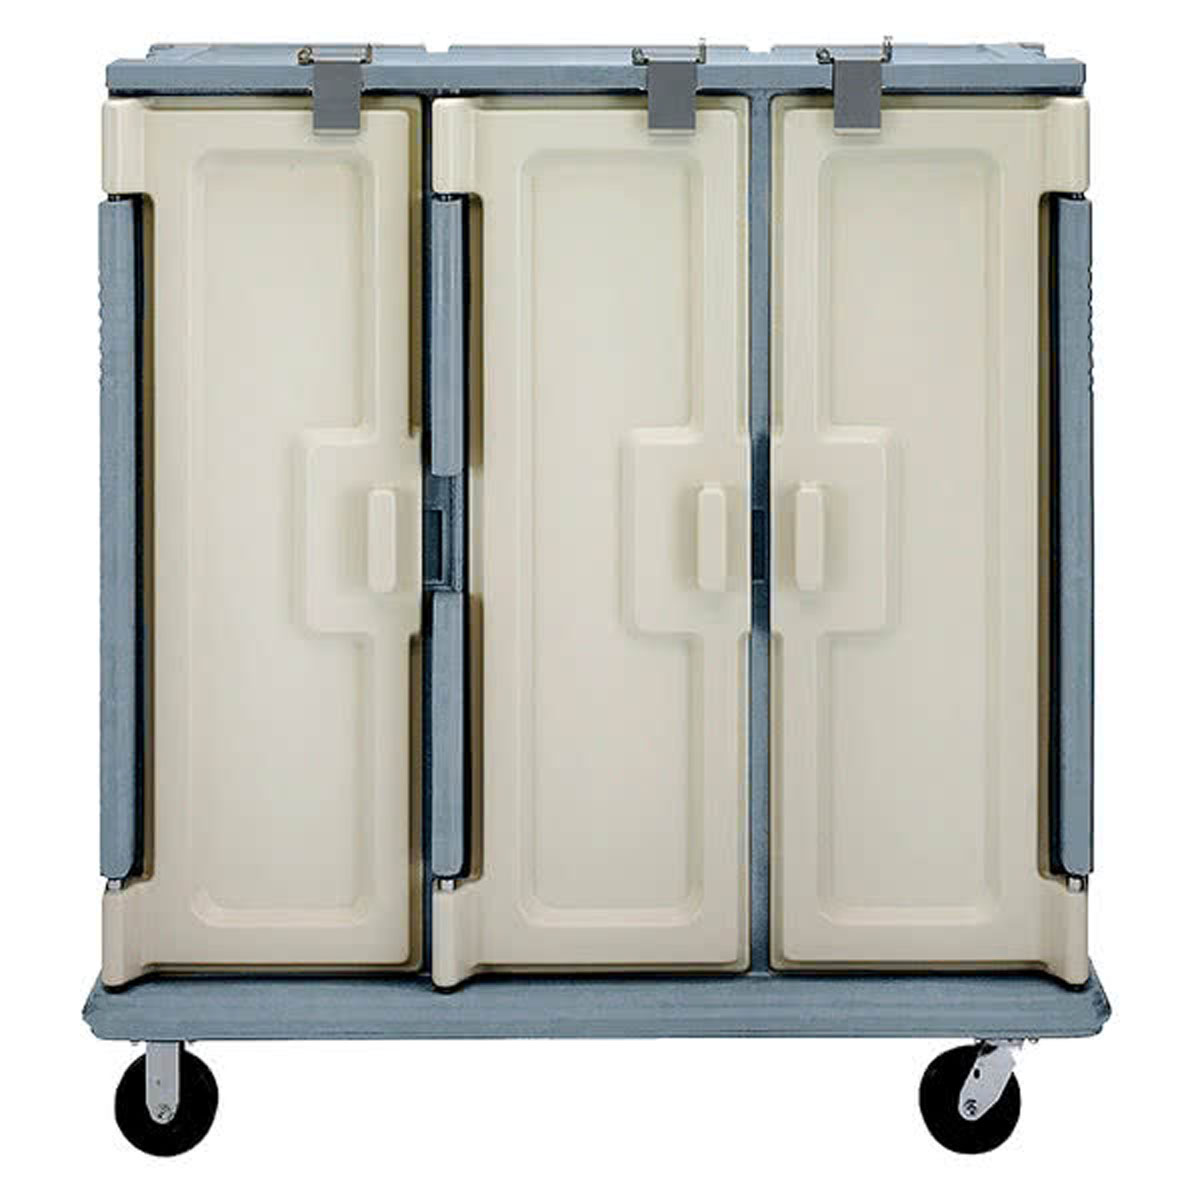 Cambro MDC1520T30401 Meal-Delivery Cart for Tray Service, 3 Compartments for 15'' x 20'' Trays, Tall - Slate Blue w/Cream Doors